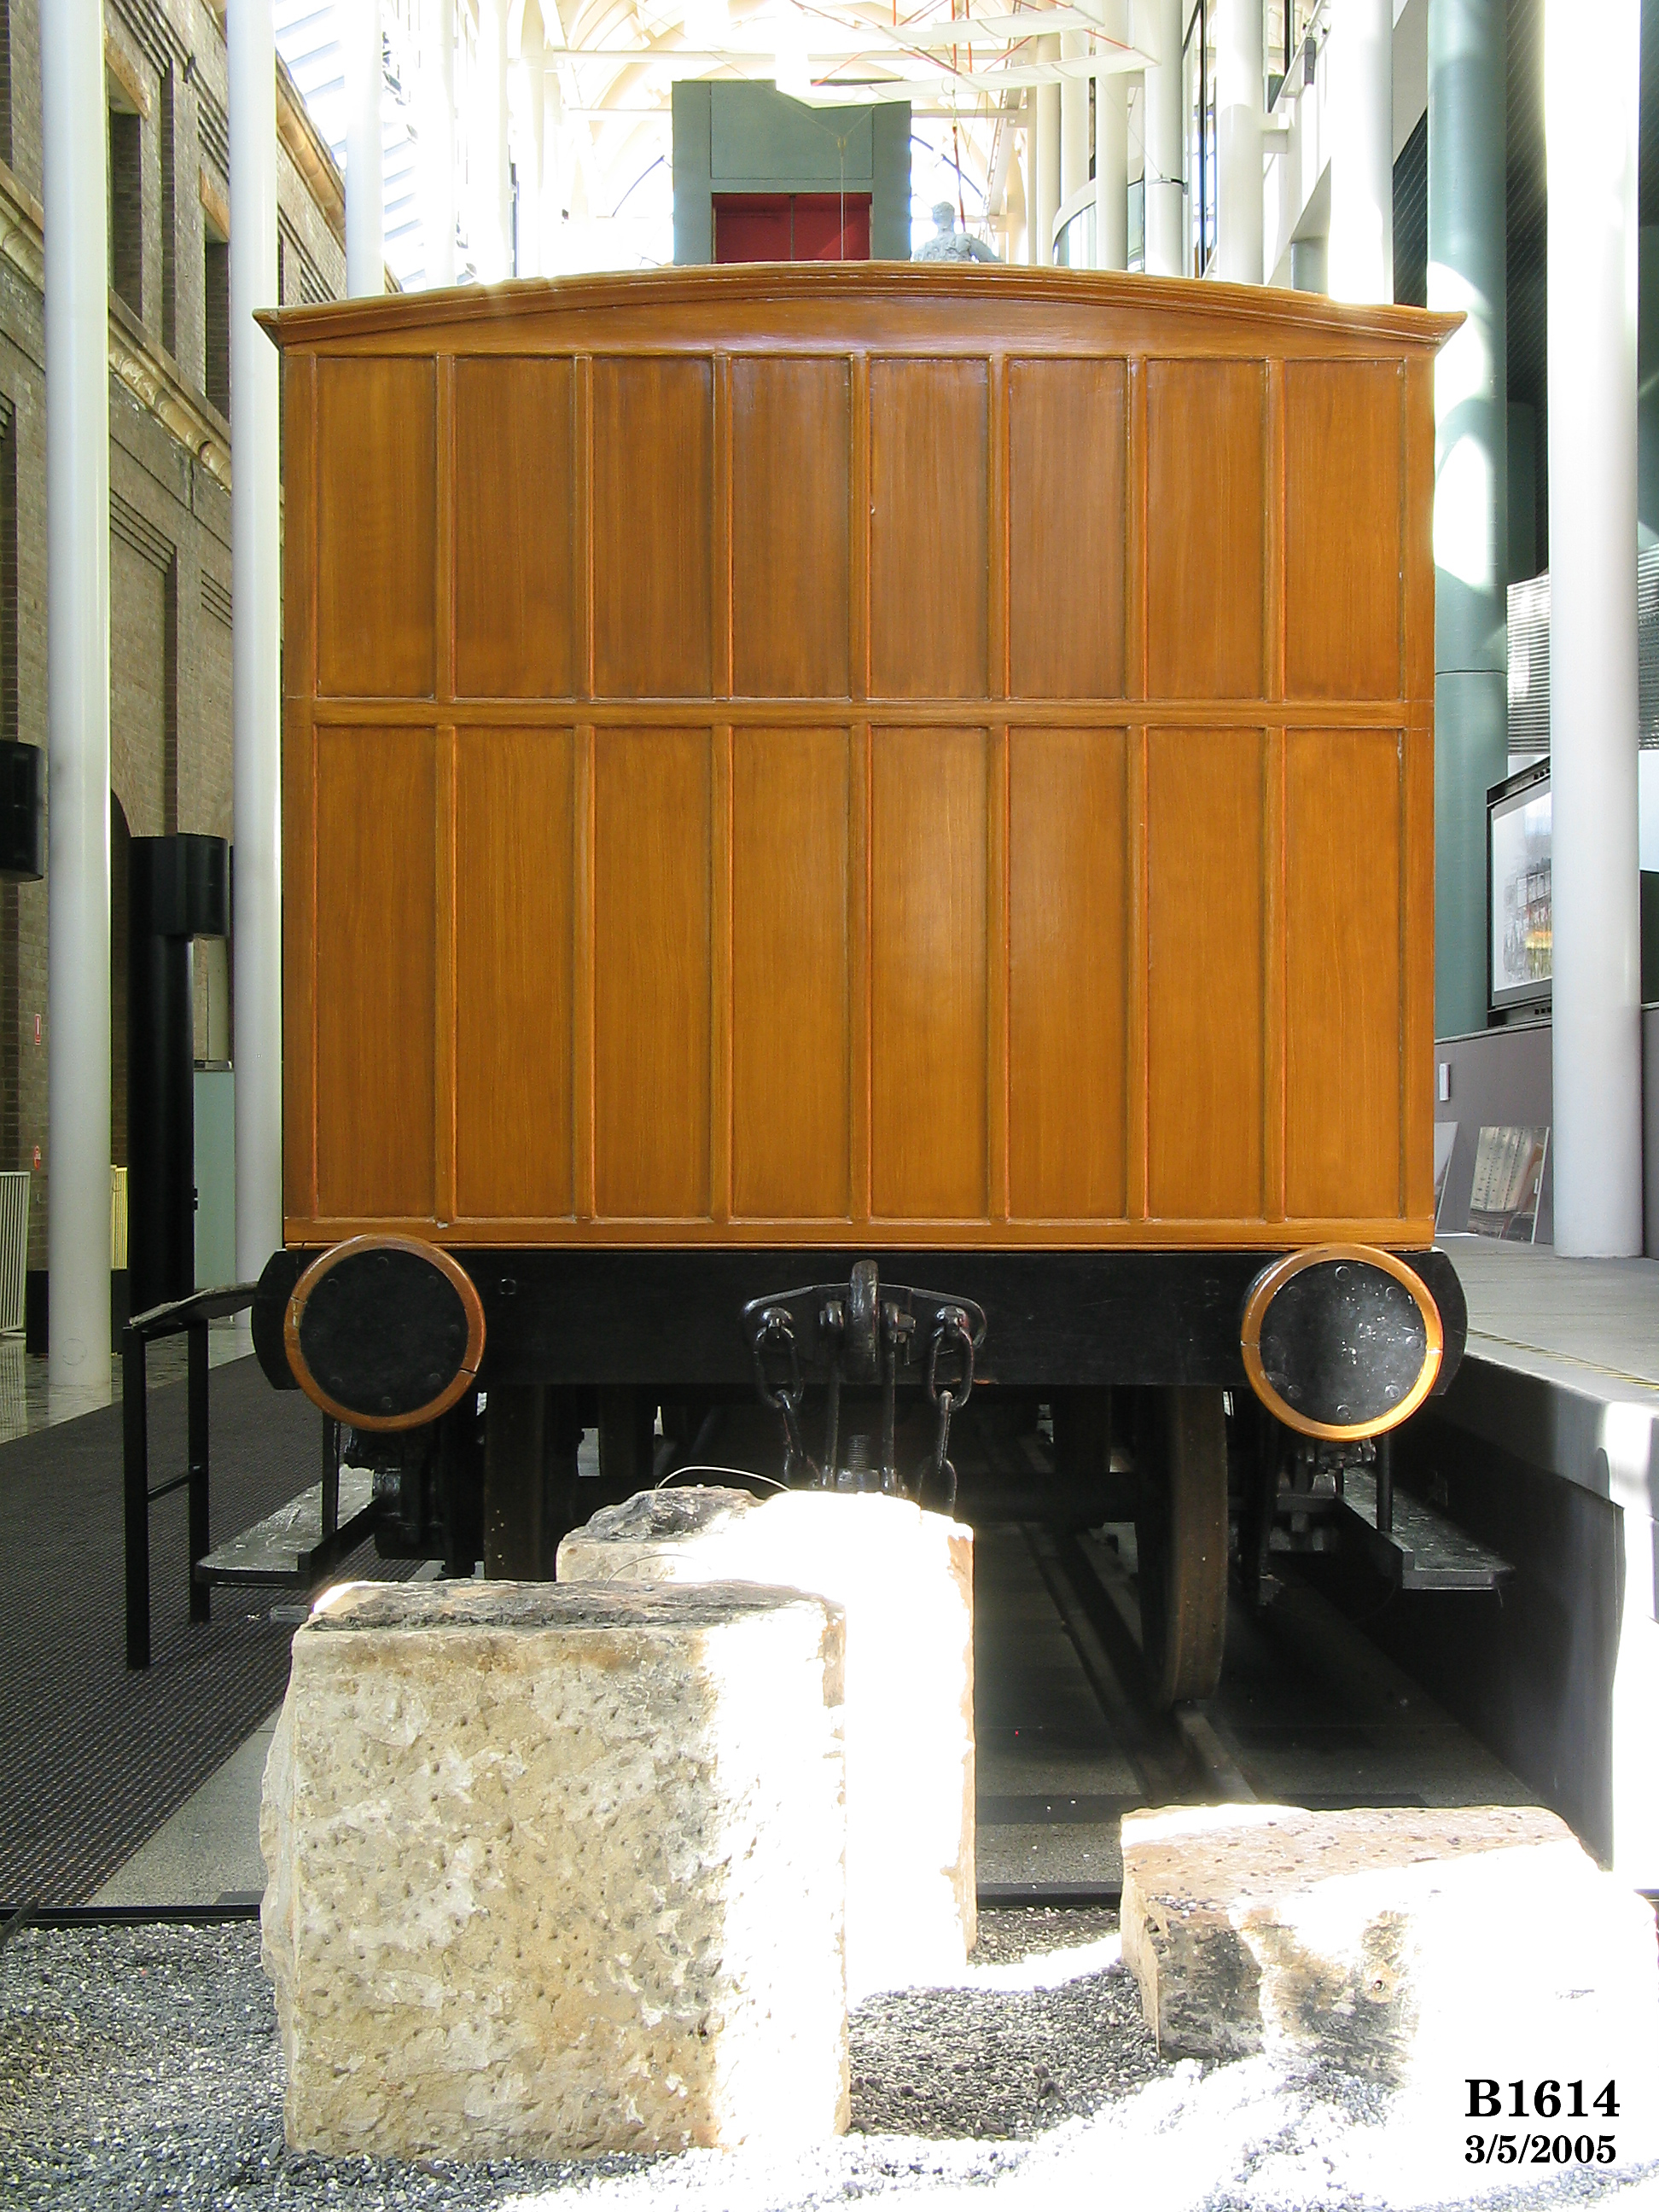 Third class railway carriage used on first railway in New South Wales